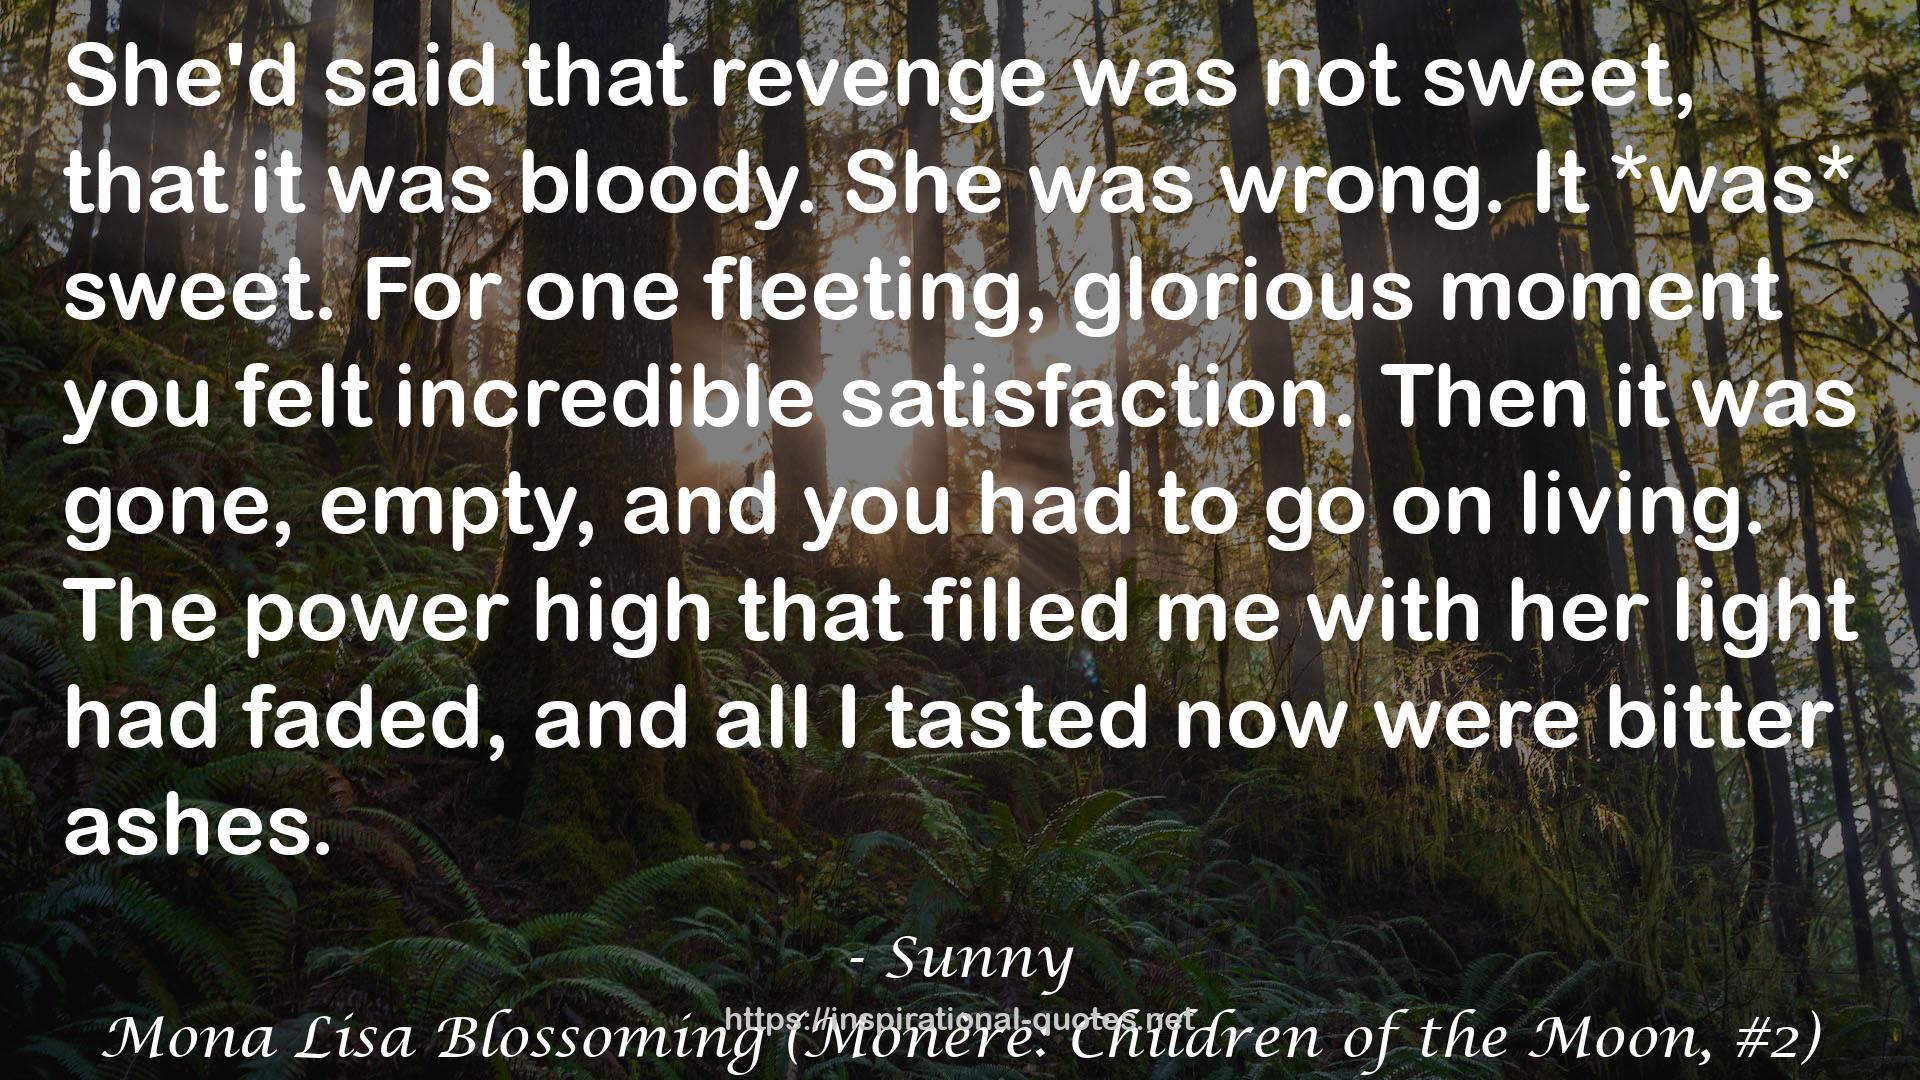 Mona Lisa Blossoming (Monère: Children of the Moon, #2) QUOTES